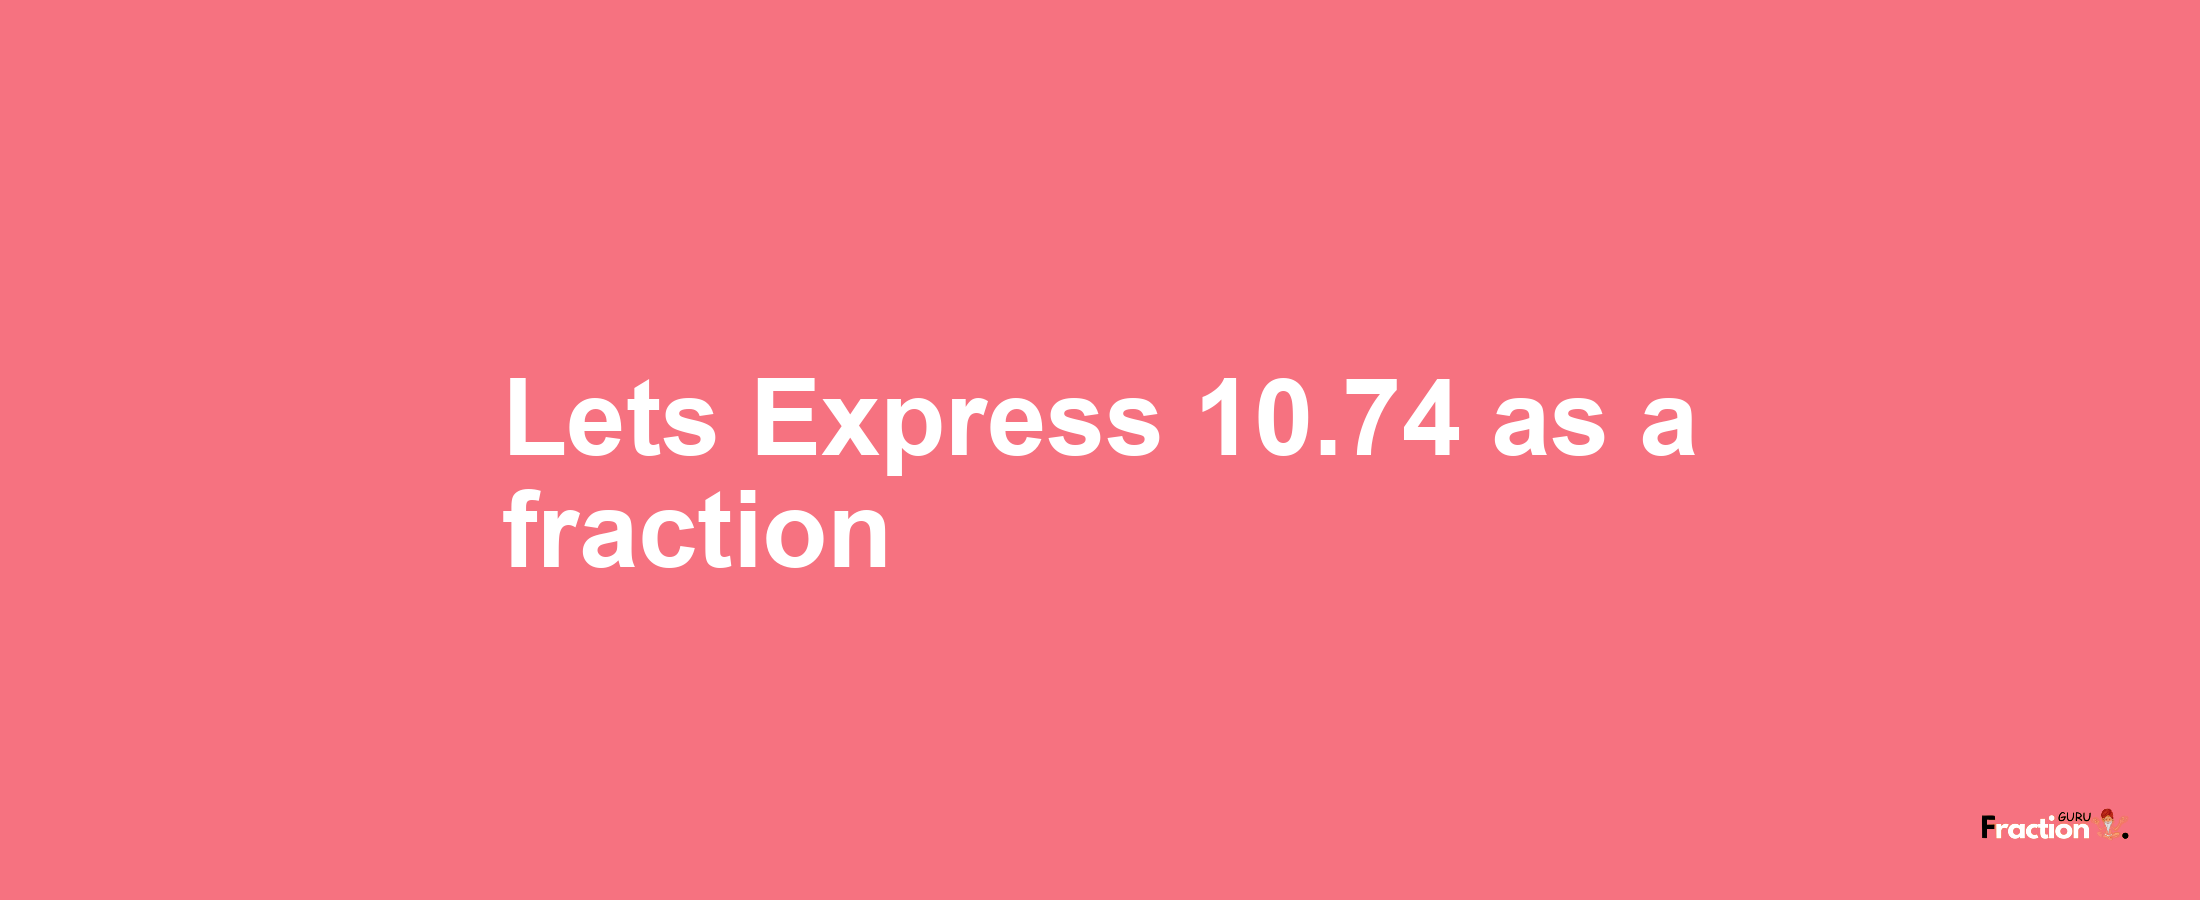 Lets Express 10.74 as afraction